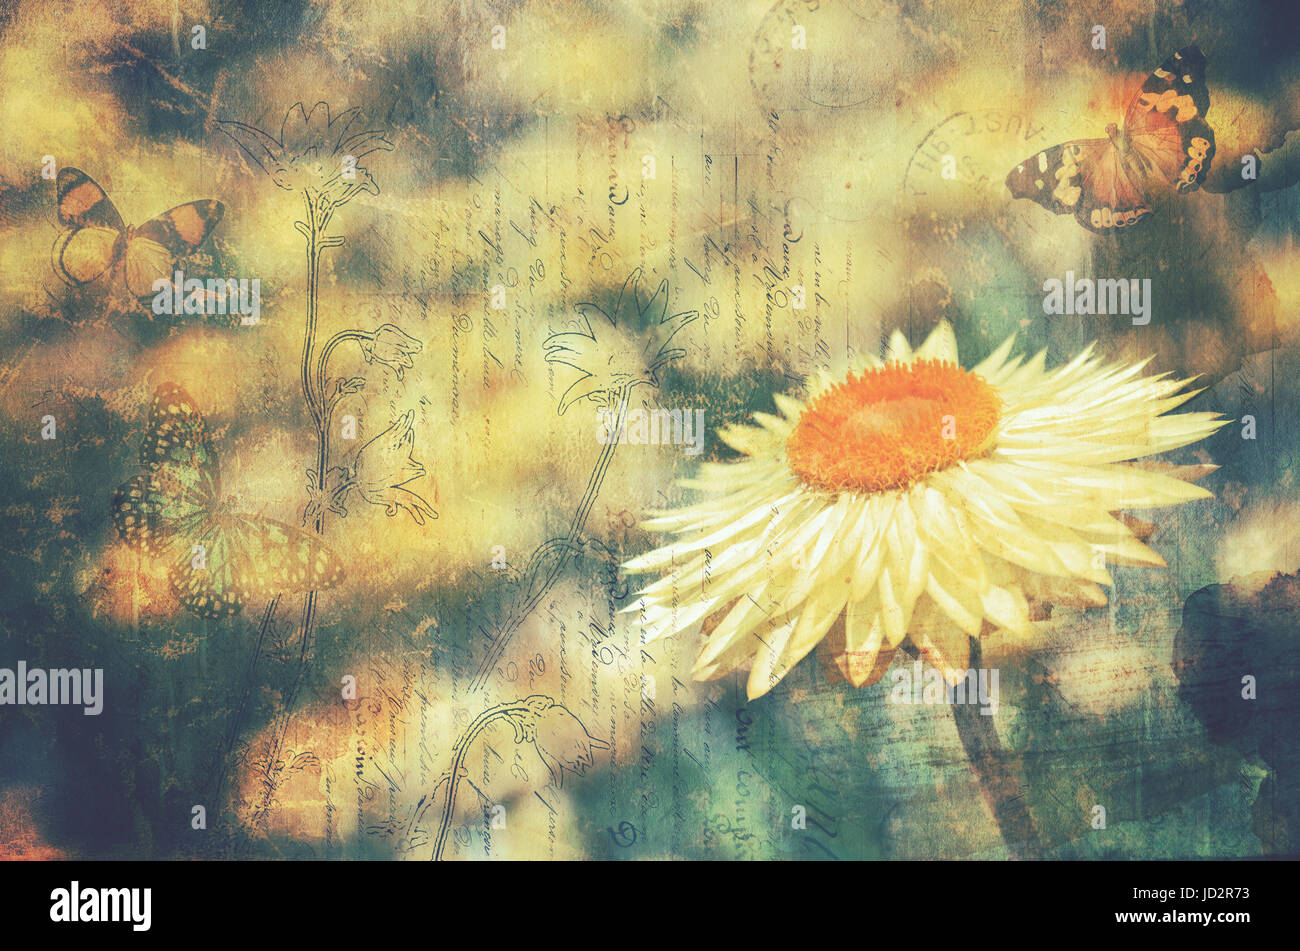 Vintage textured Everlasting Daisy and butterflies. Postcard style background with copy space for text. Stock Photo